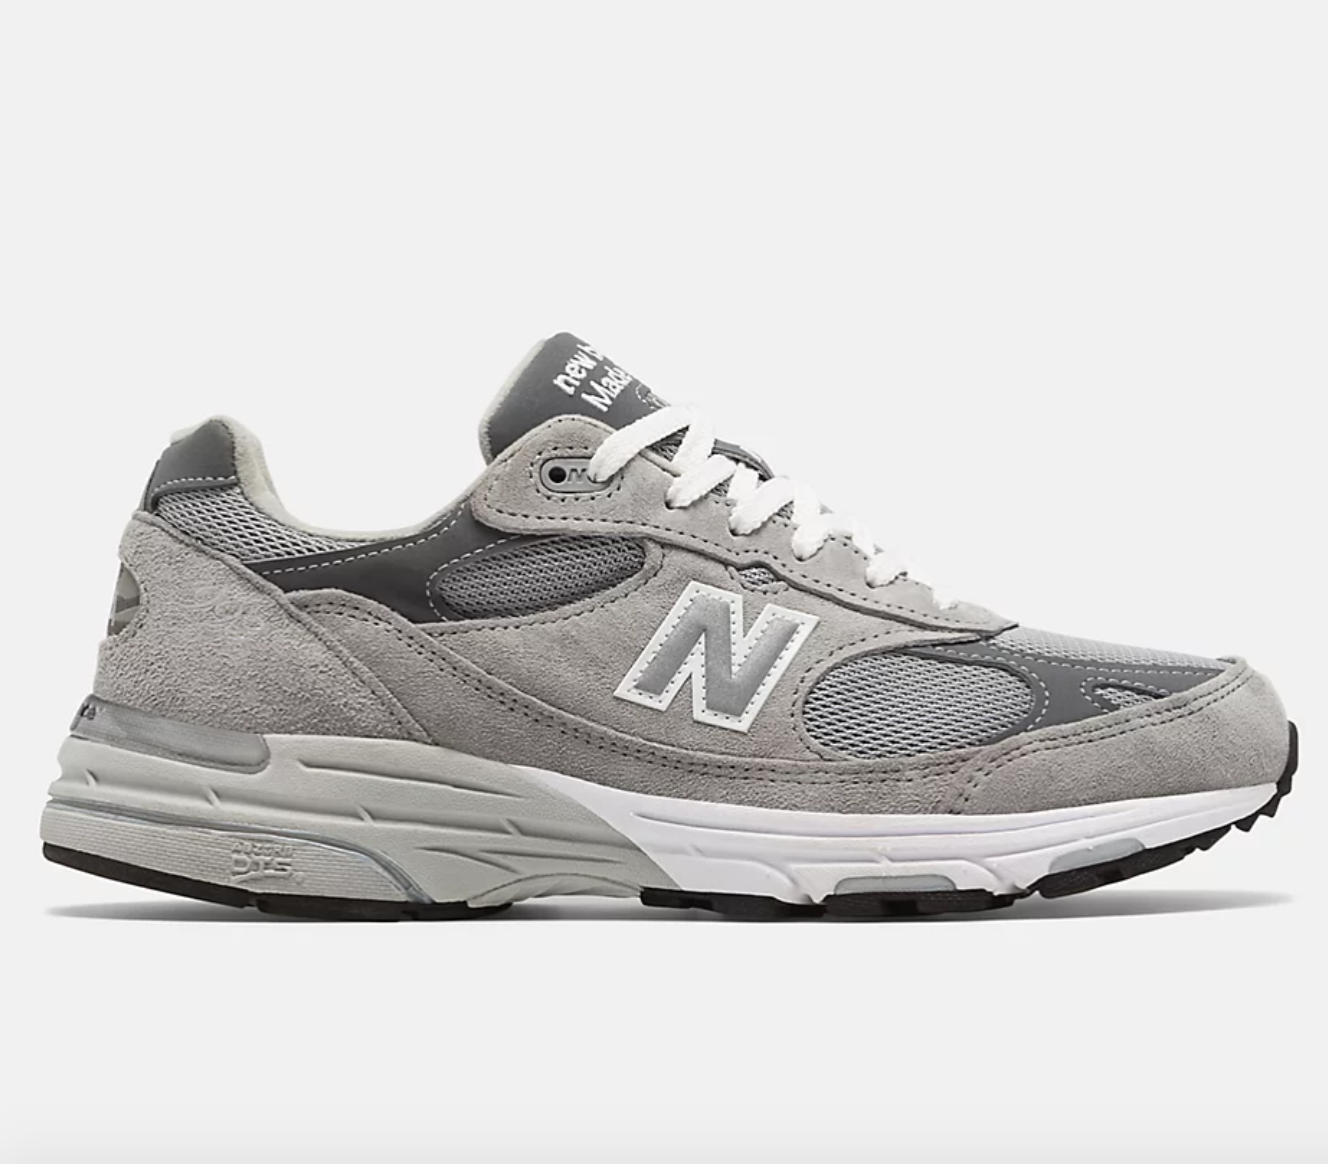 The Best New Balance Sneakers According To User Reviews